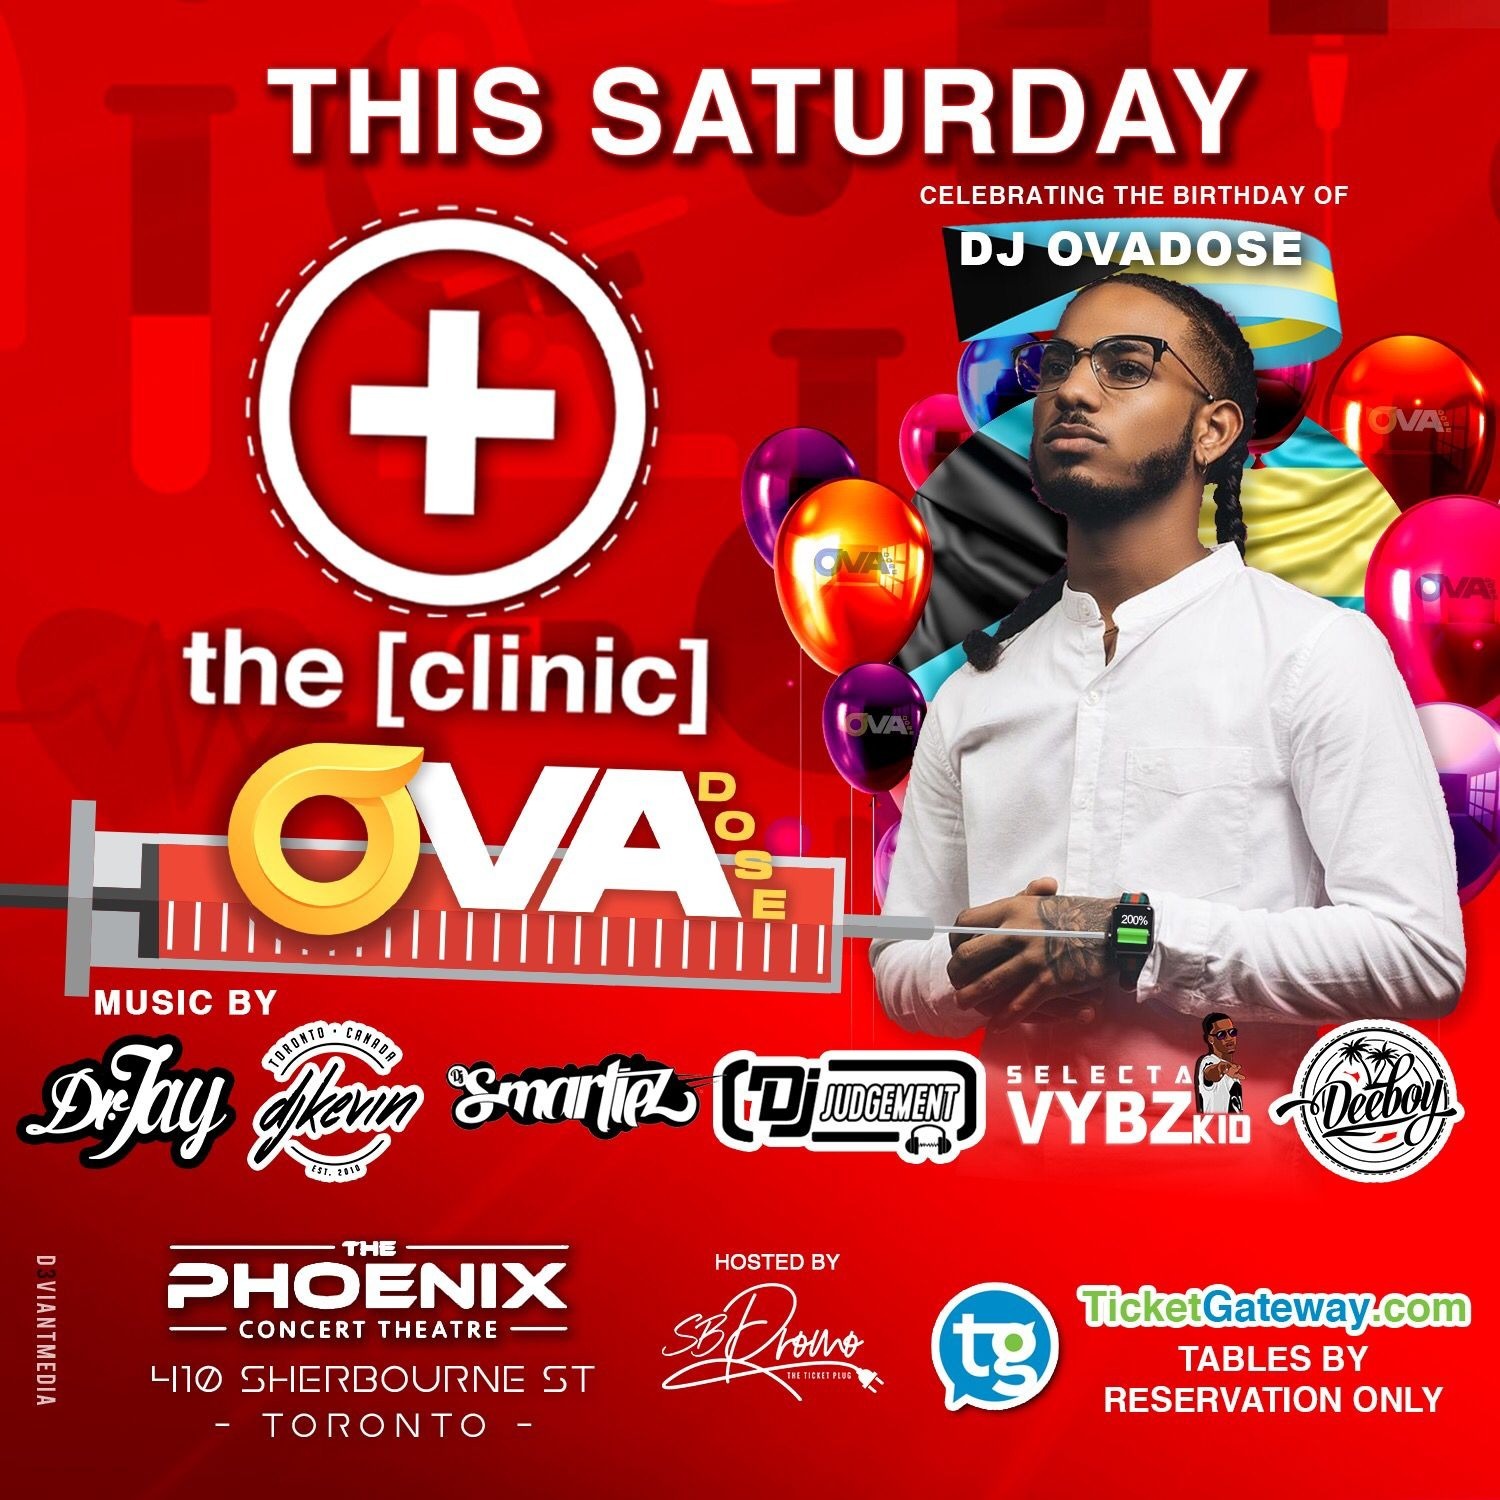 The Clinic at the Phoenix